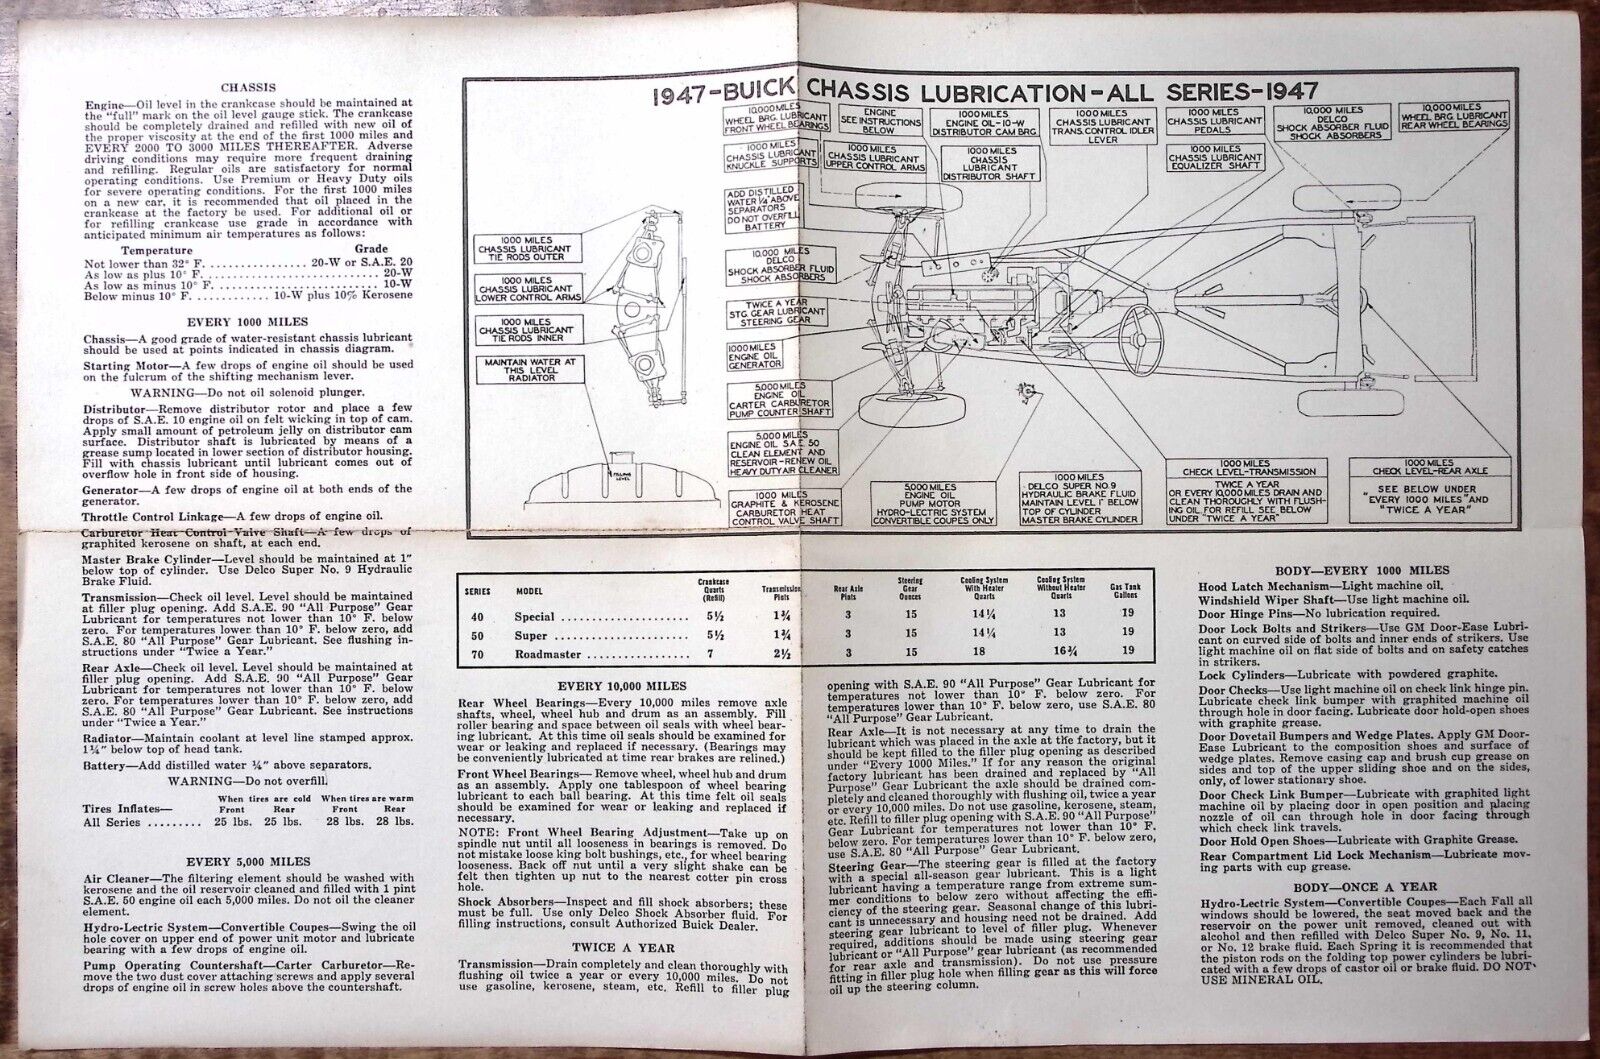 1947 BUICK CHASSIS LUBRICATION CHART WITH MAINTENANCE SCHEDULE FOLD OUT  Z5008